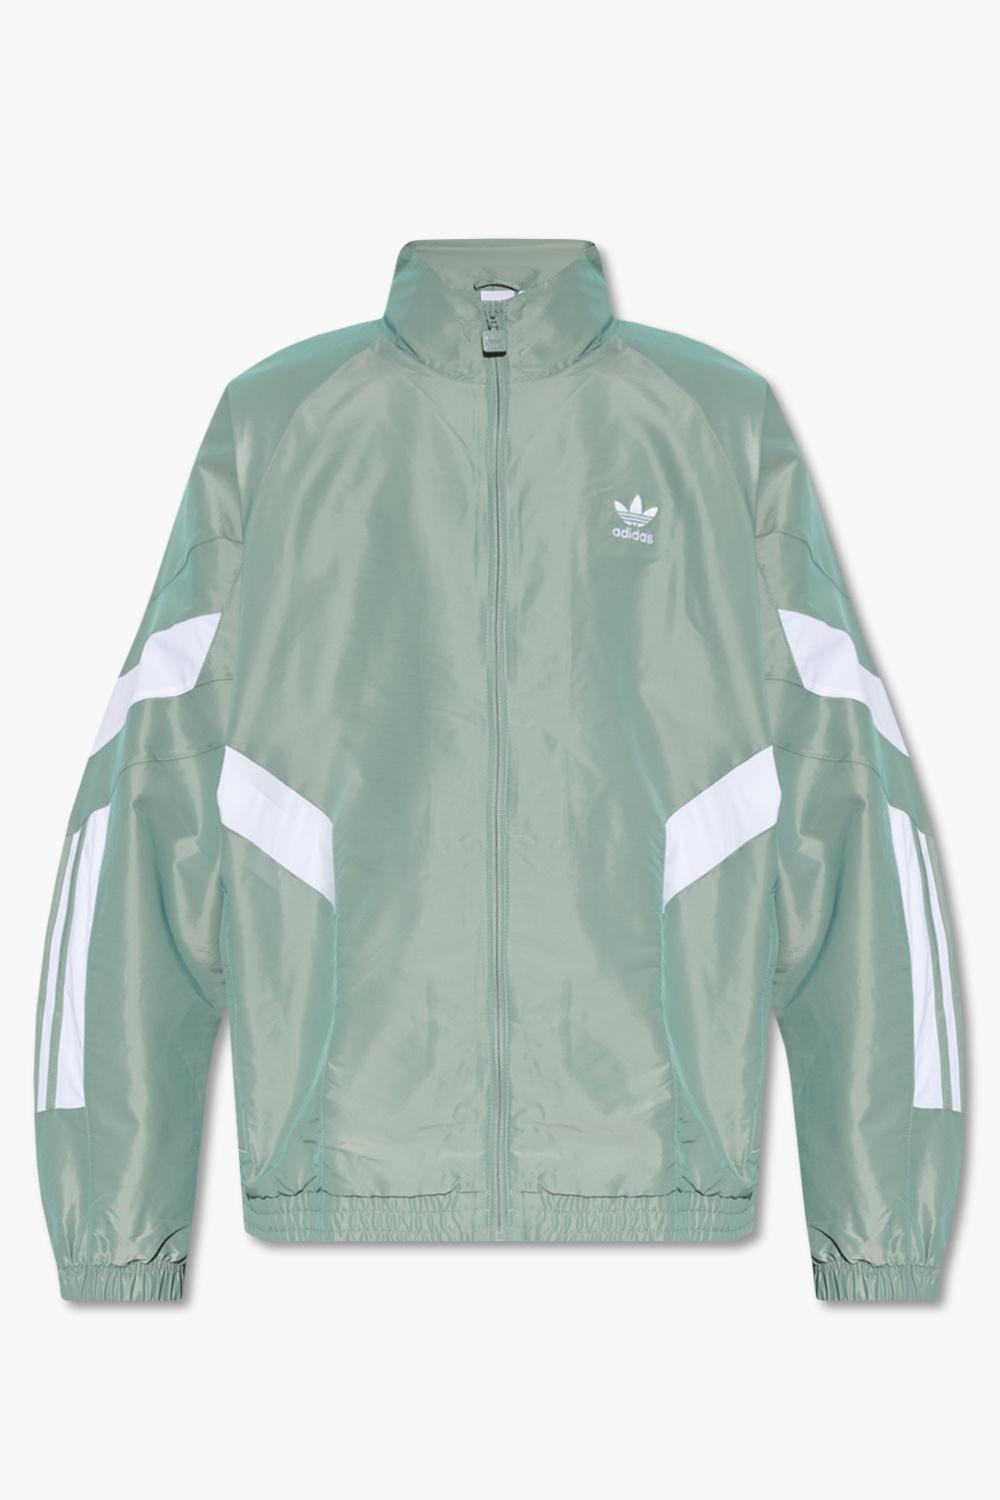 adidas Originals Jacket With Logo in Green for Men | Lyst Canada